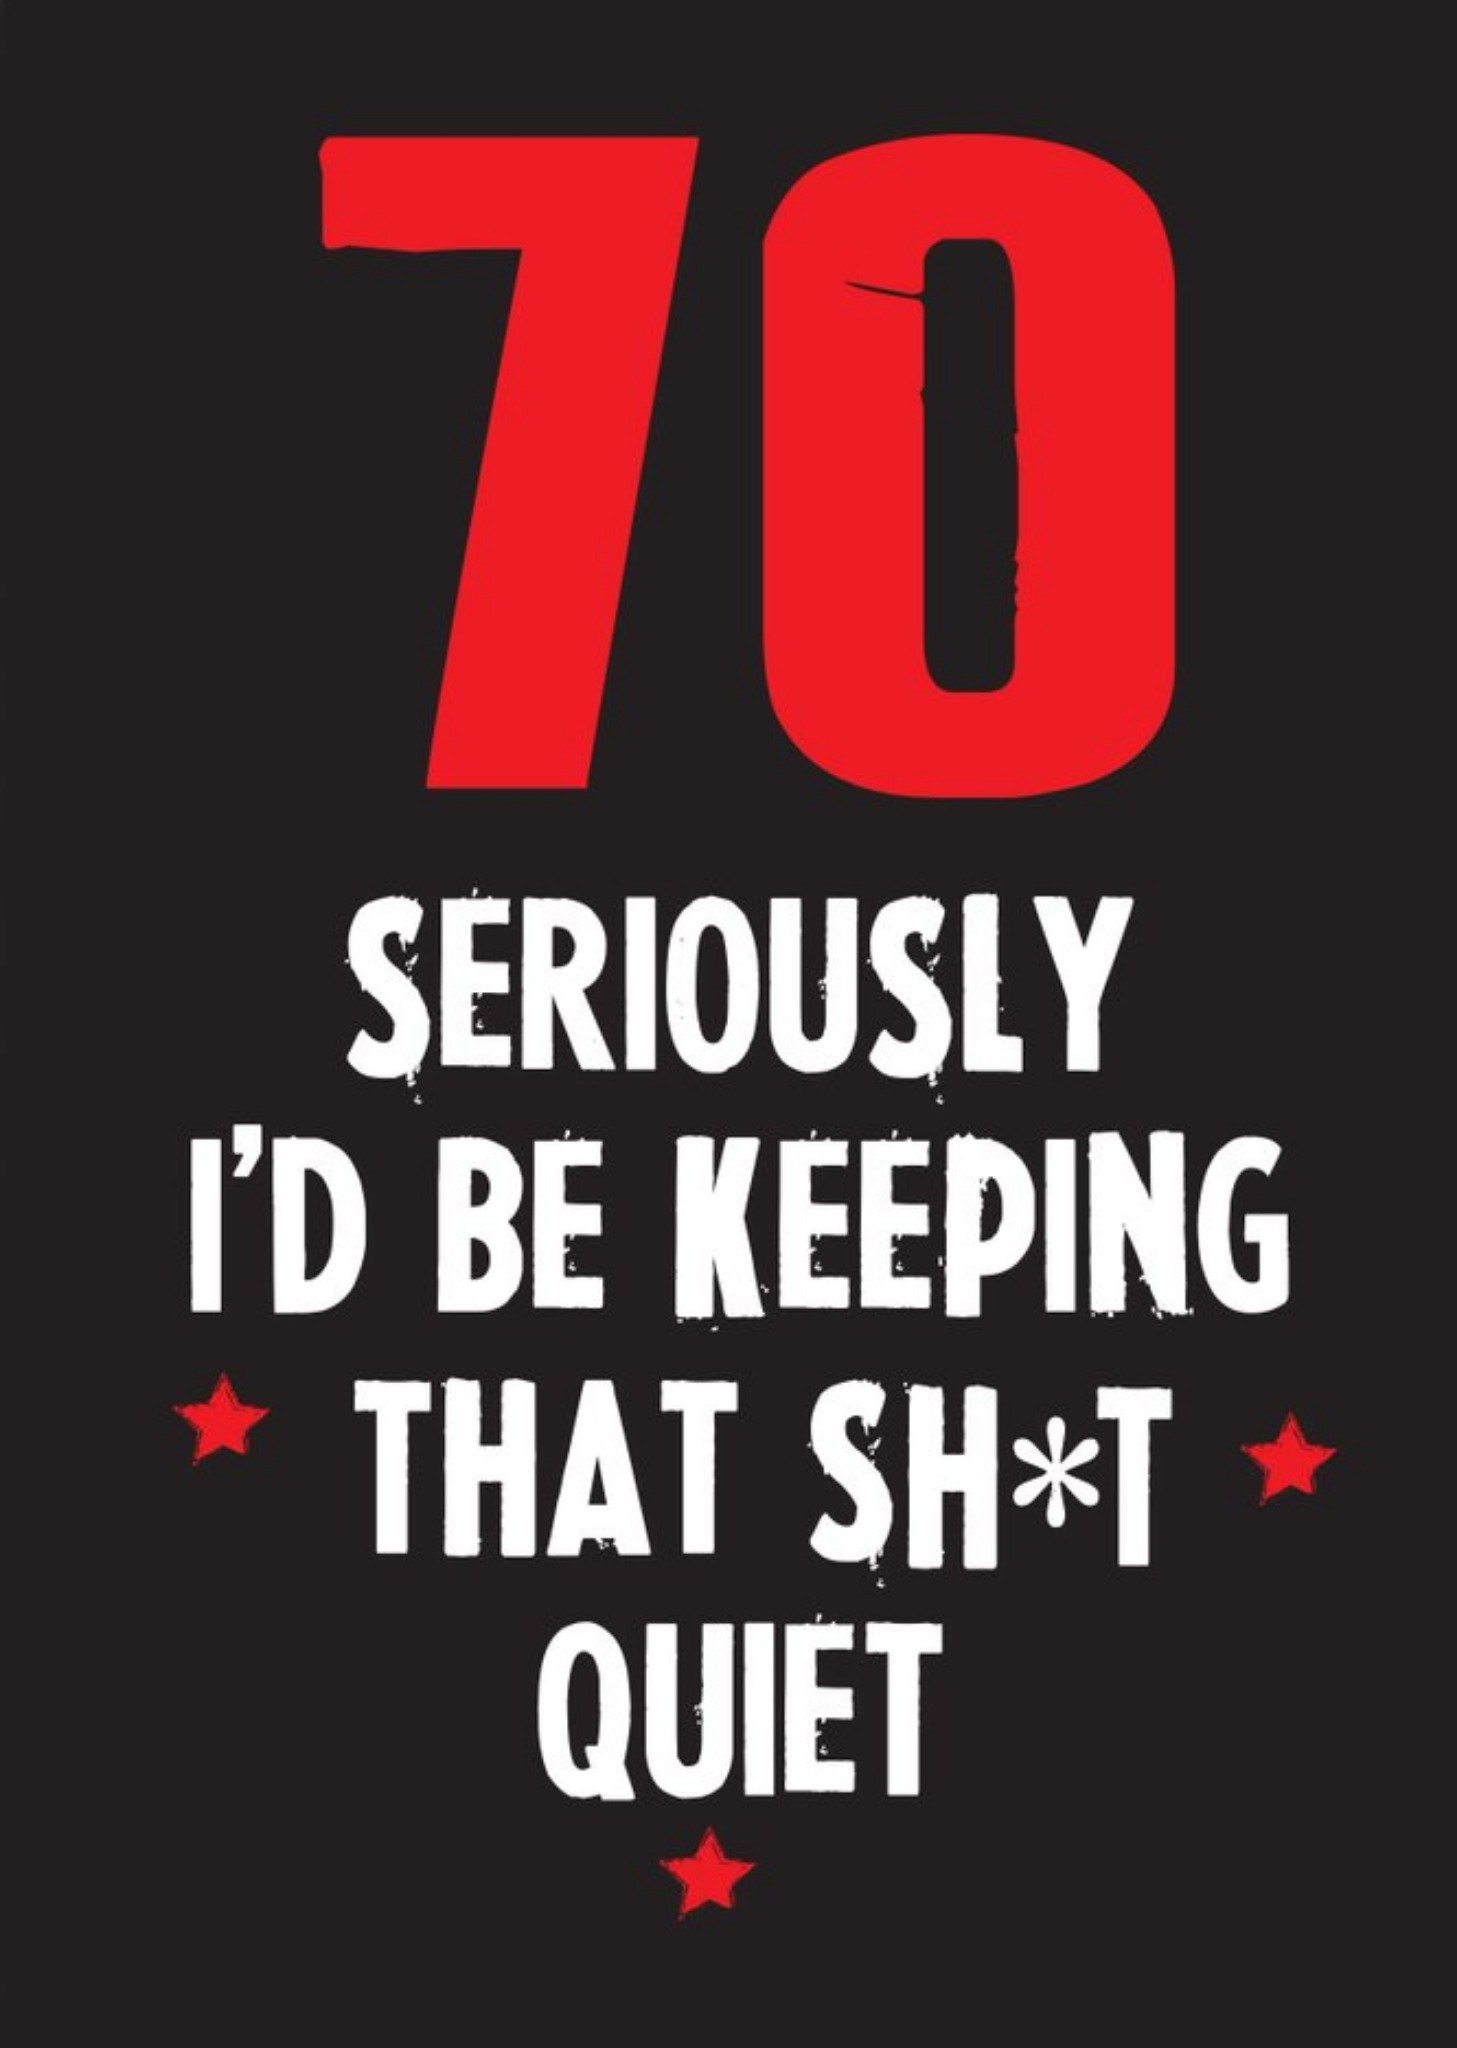 Moonpig Funny Cheeky Chops 70 Seriously Id Be Keeping That Quiet Card Ecard